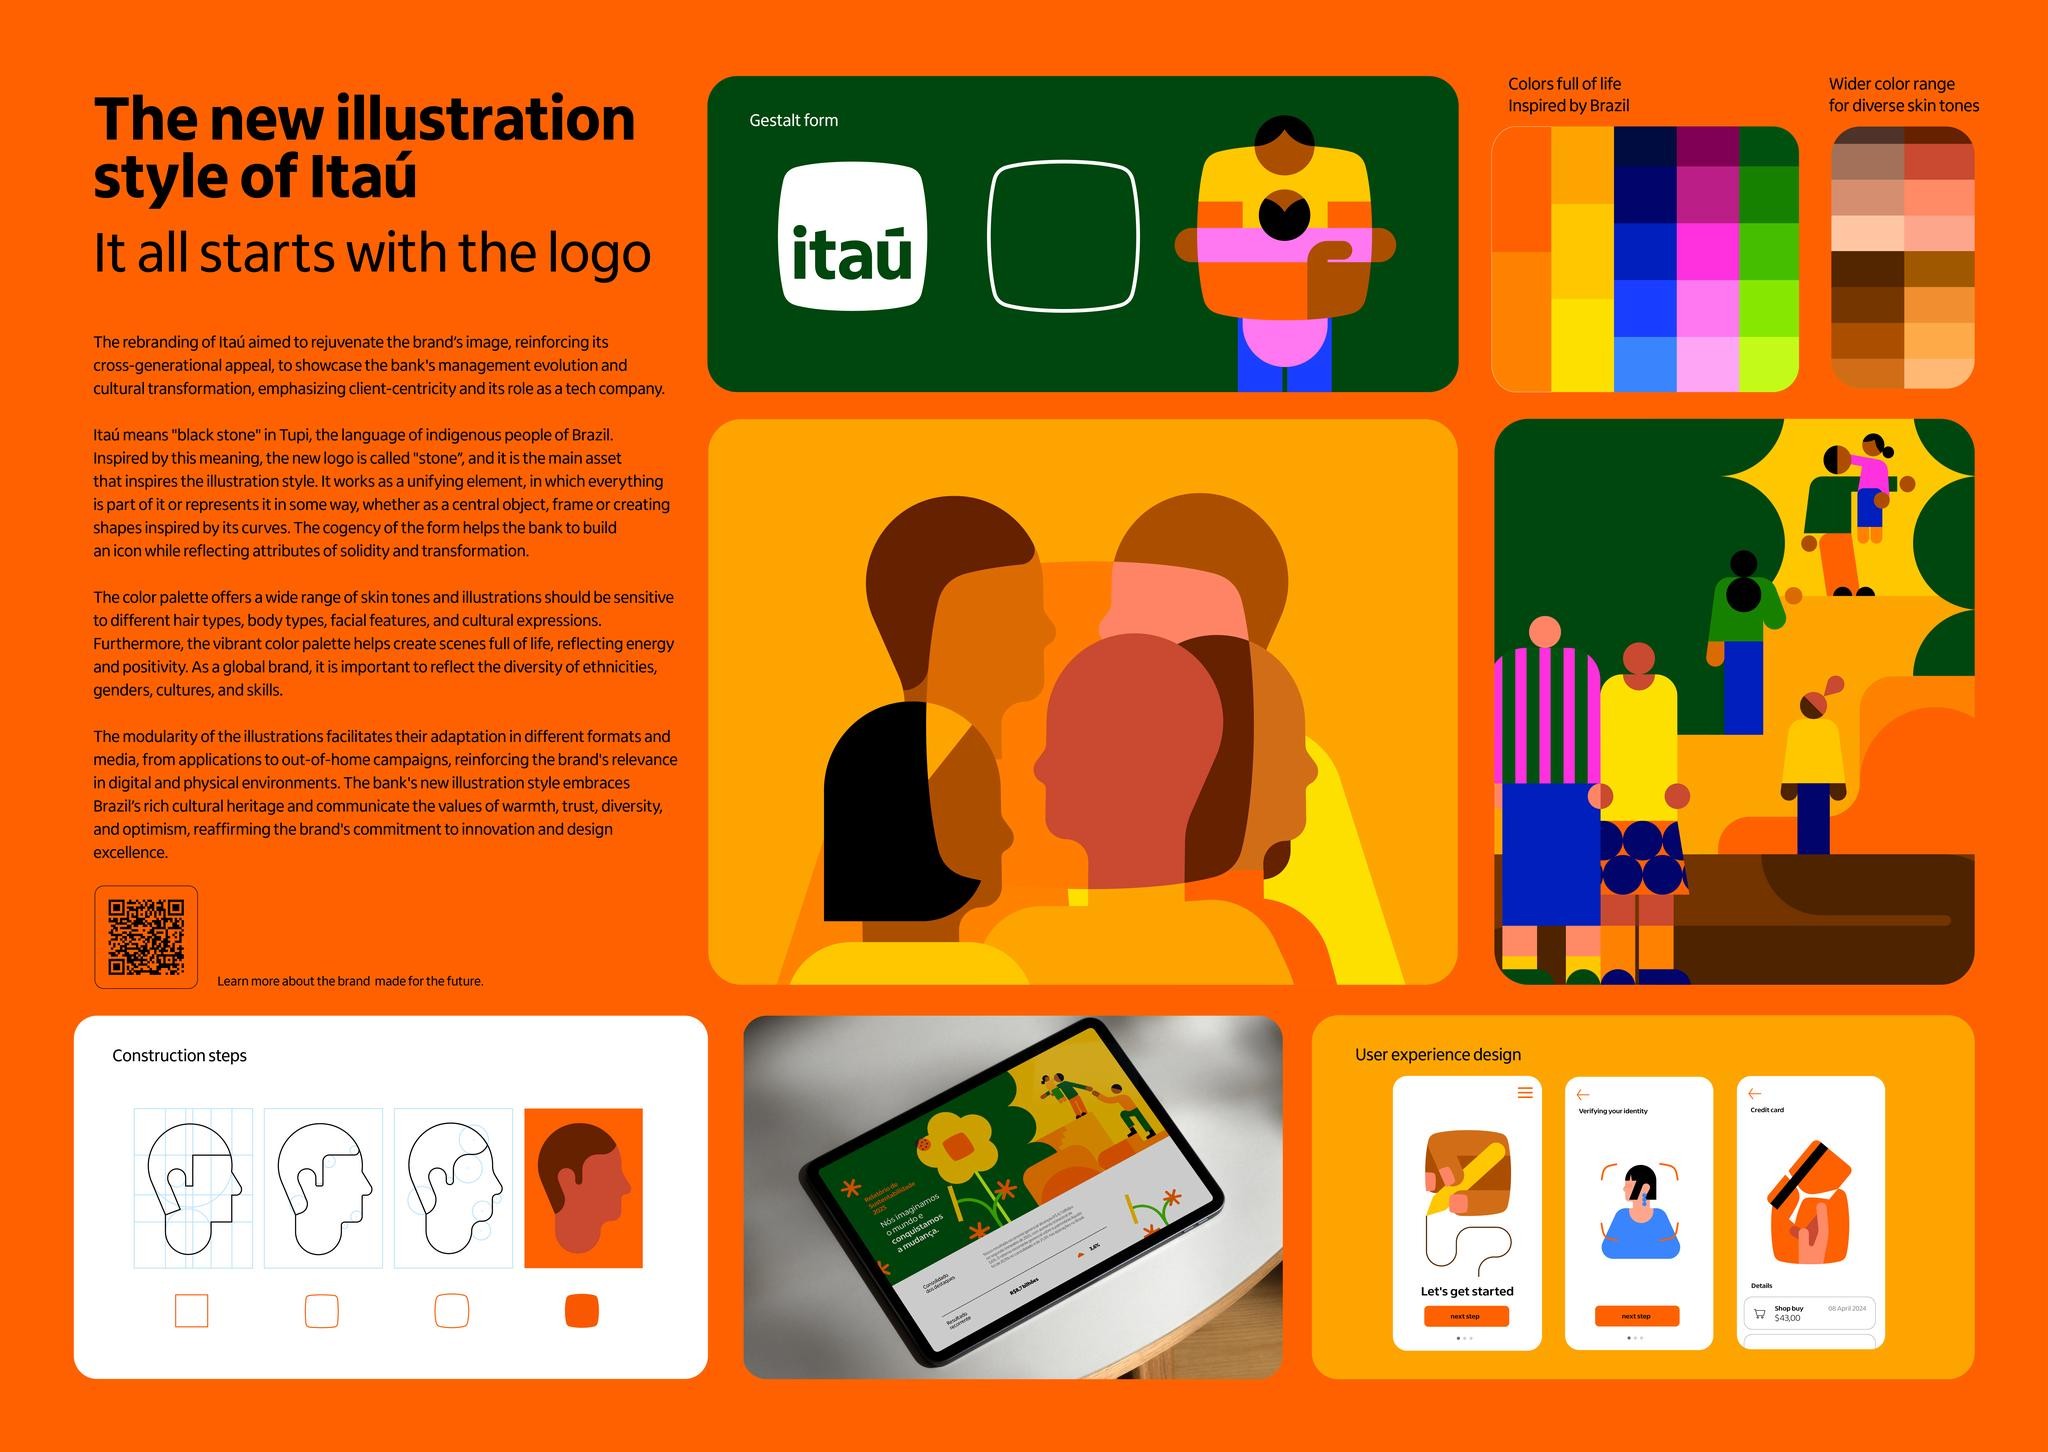 The new illustration style of Itaú